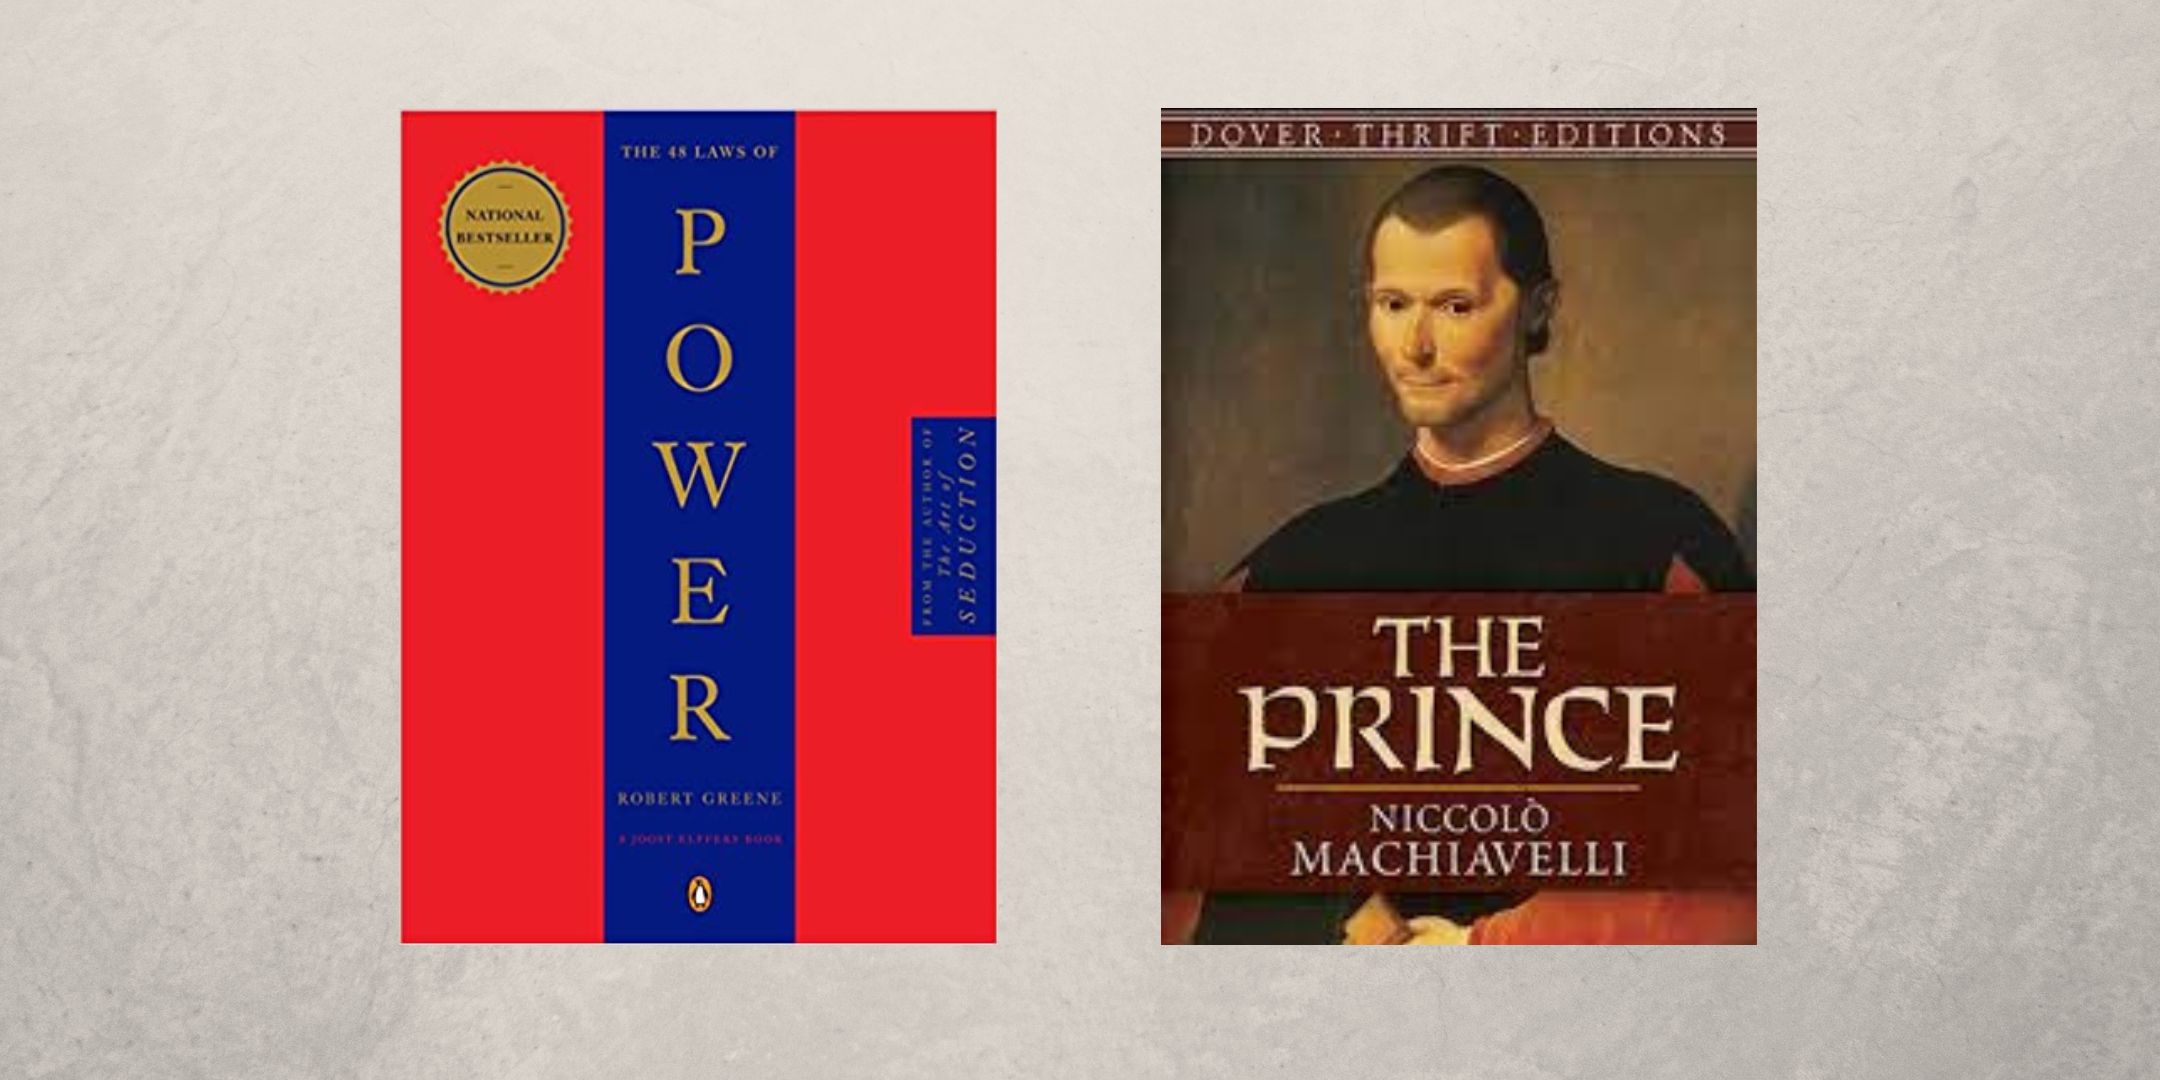 Book covers for The Prince & The 48 Laws of Power